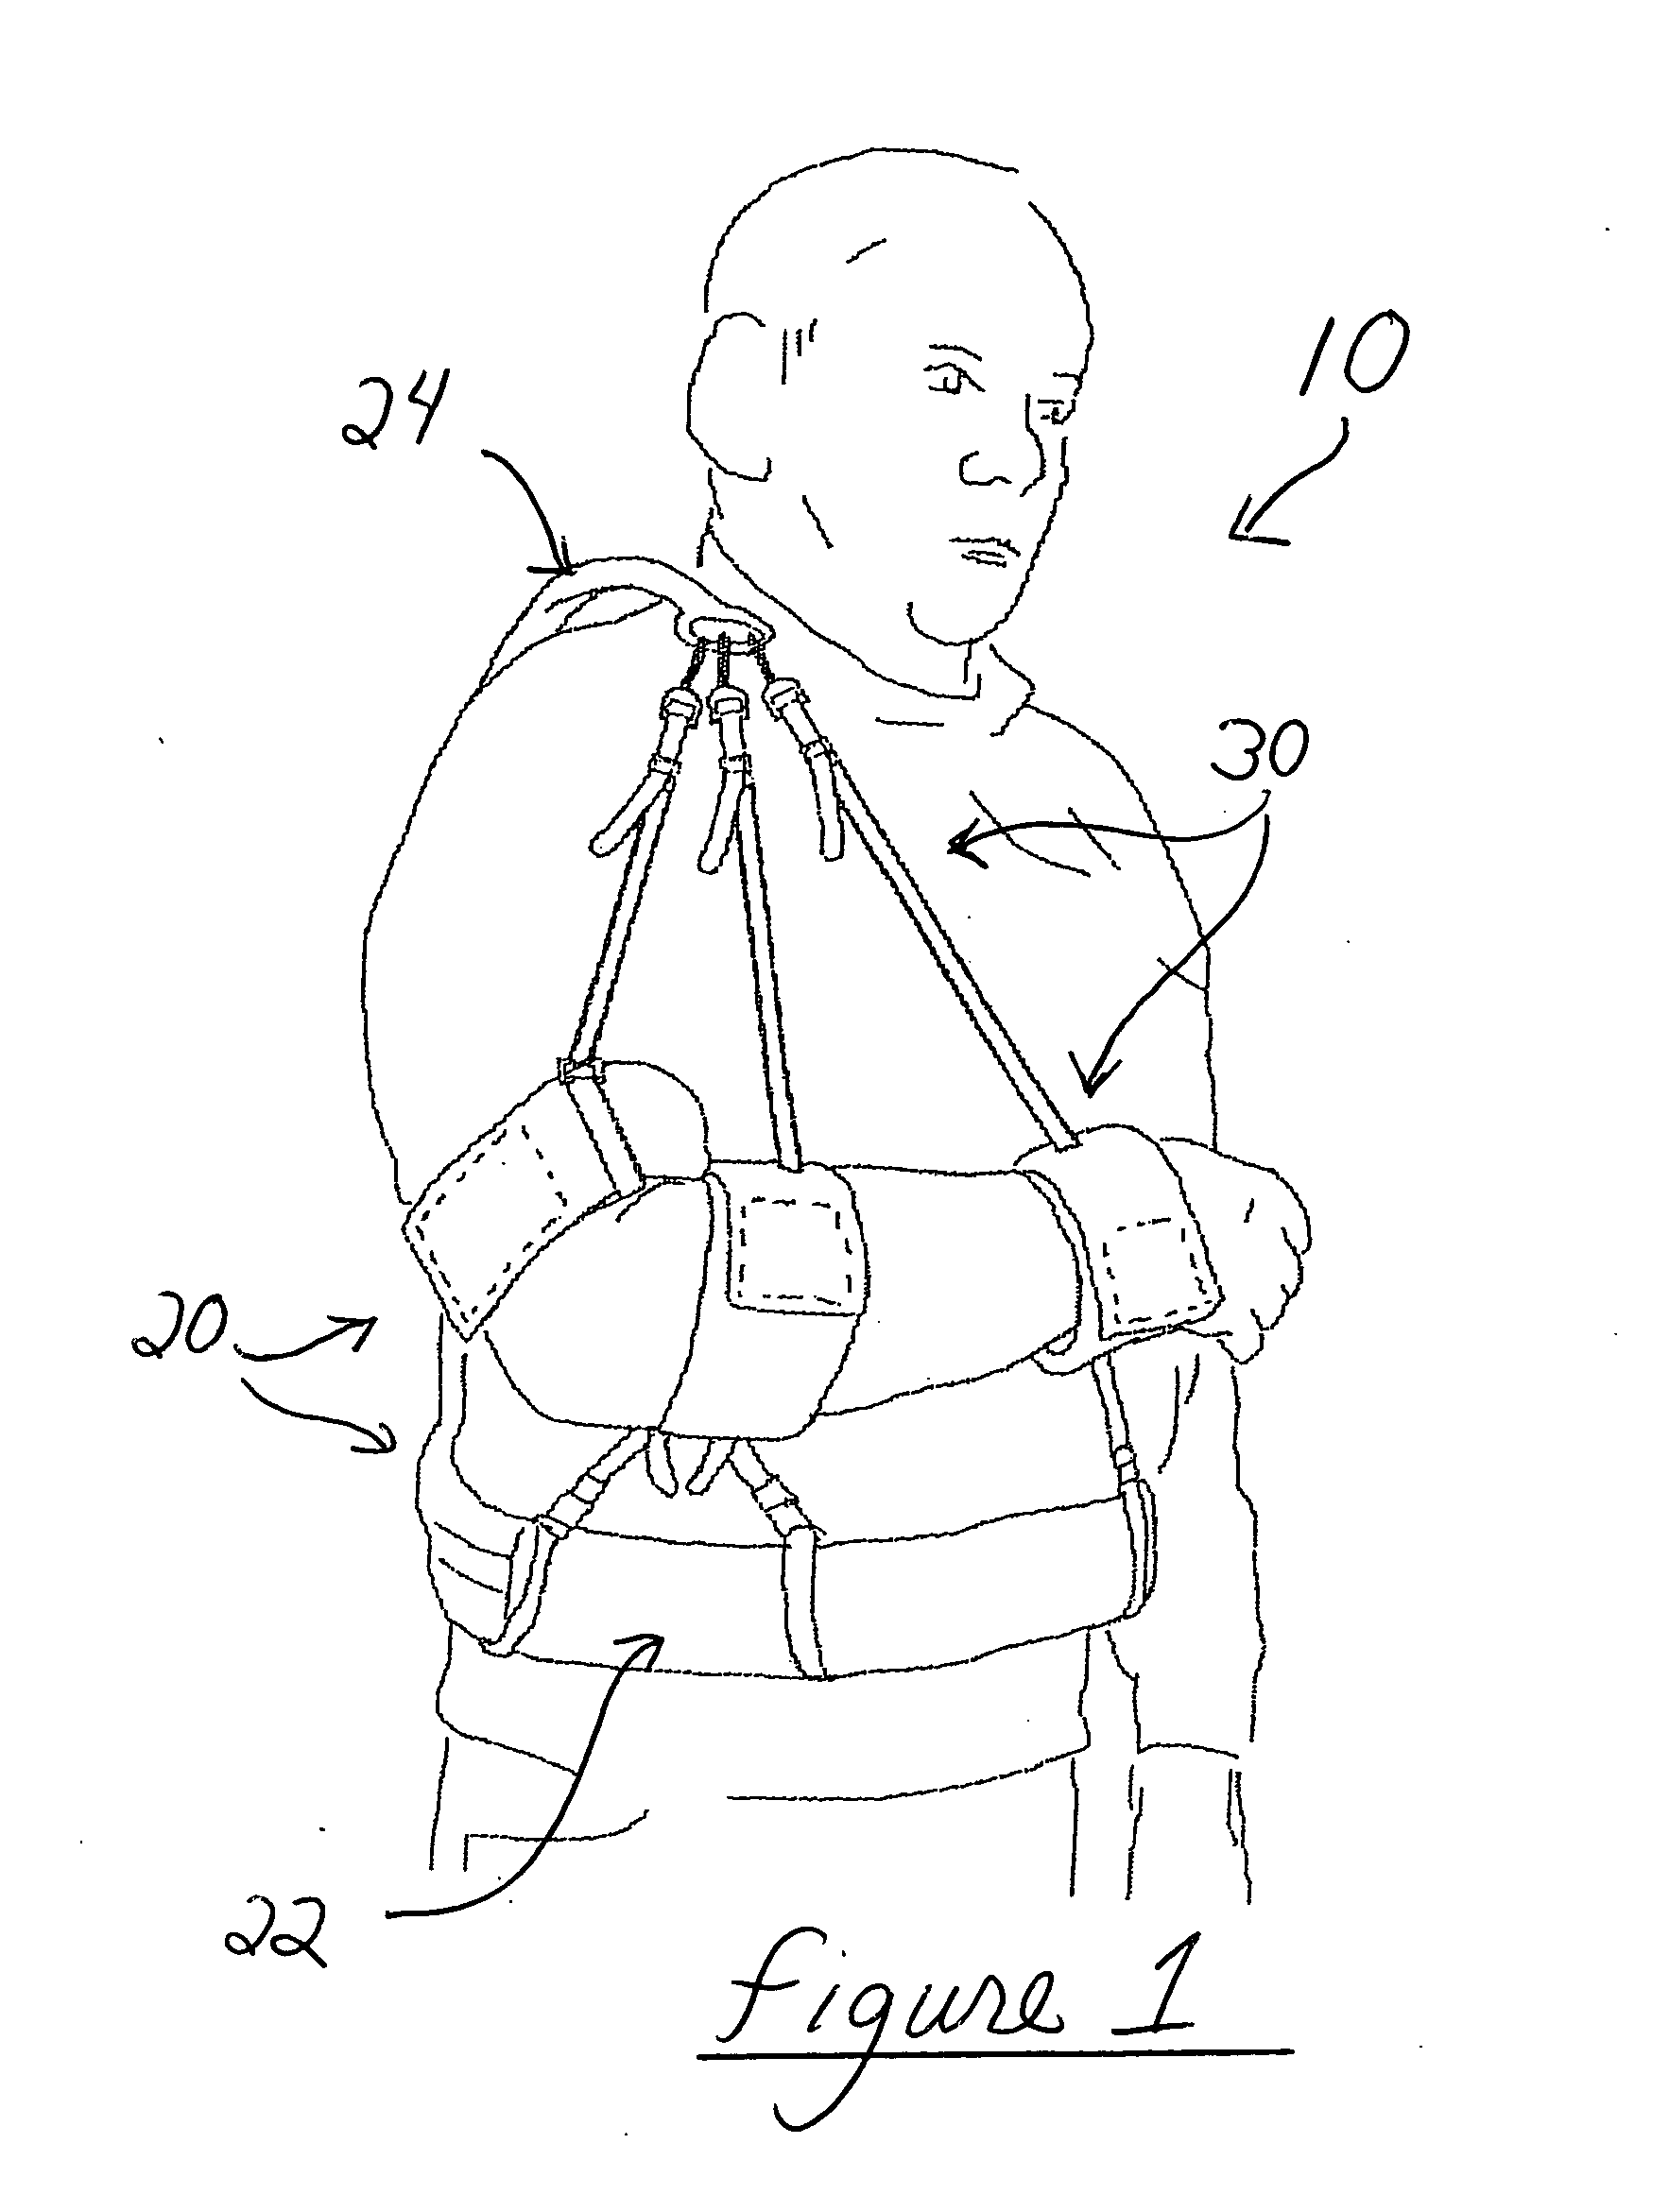 Arm sling apparatus allowing movement or total immobilization